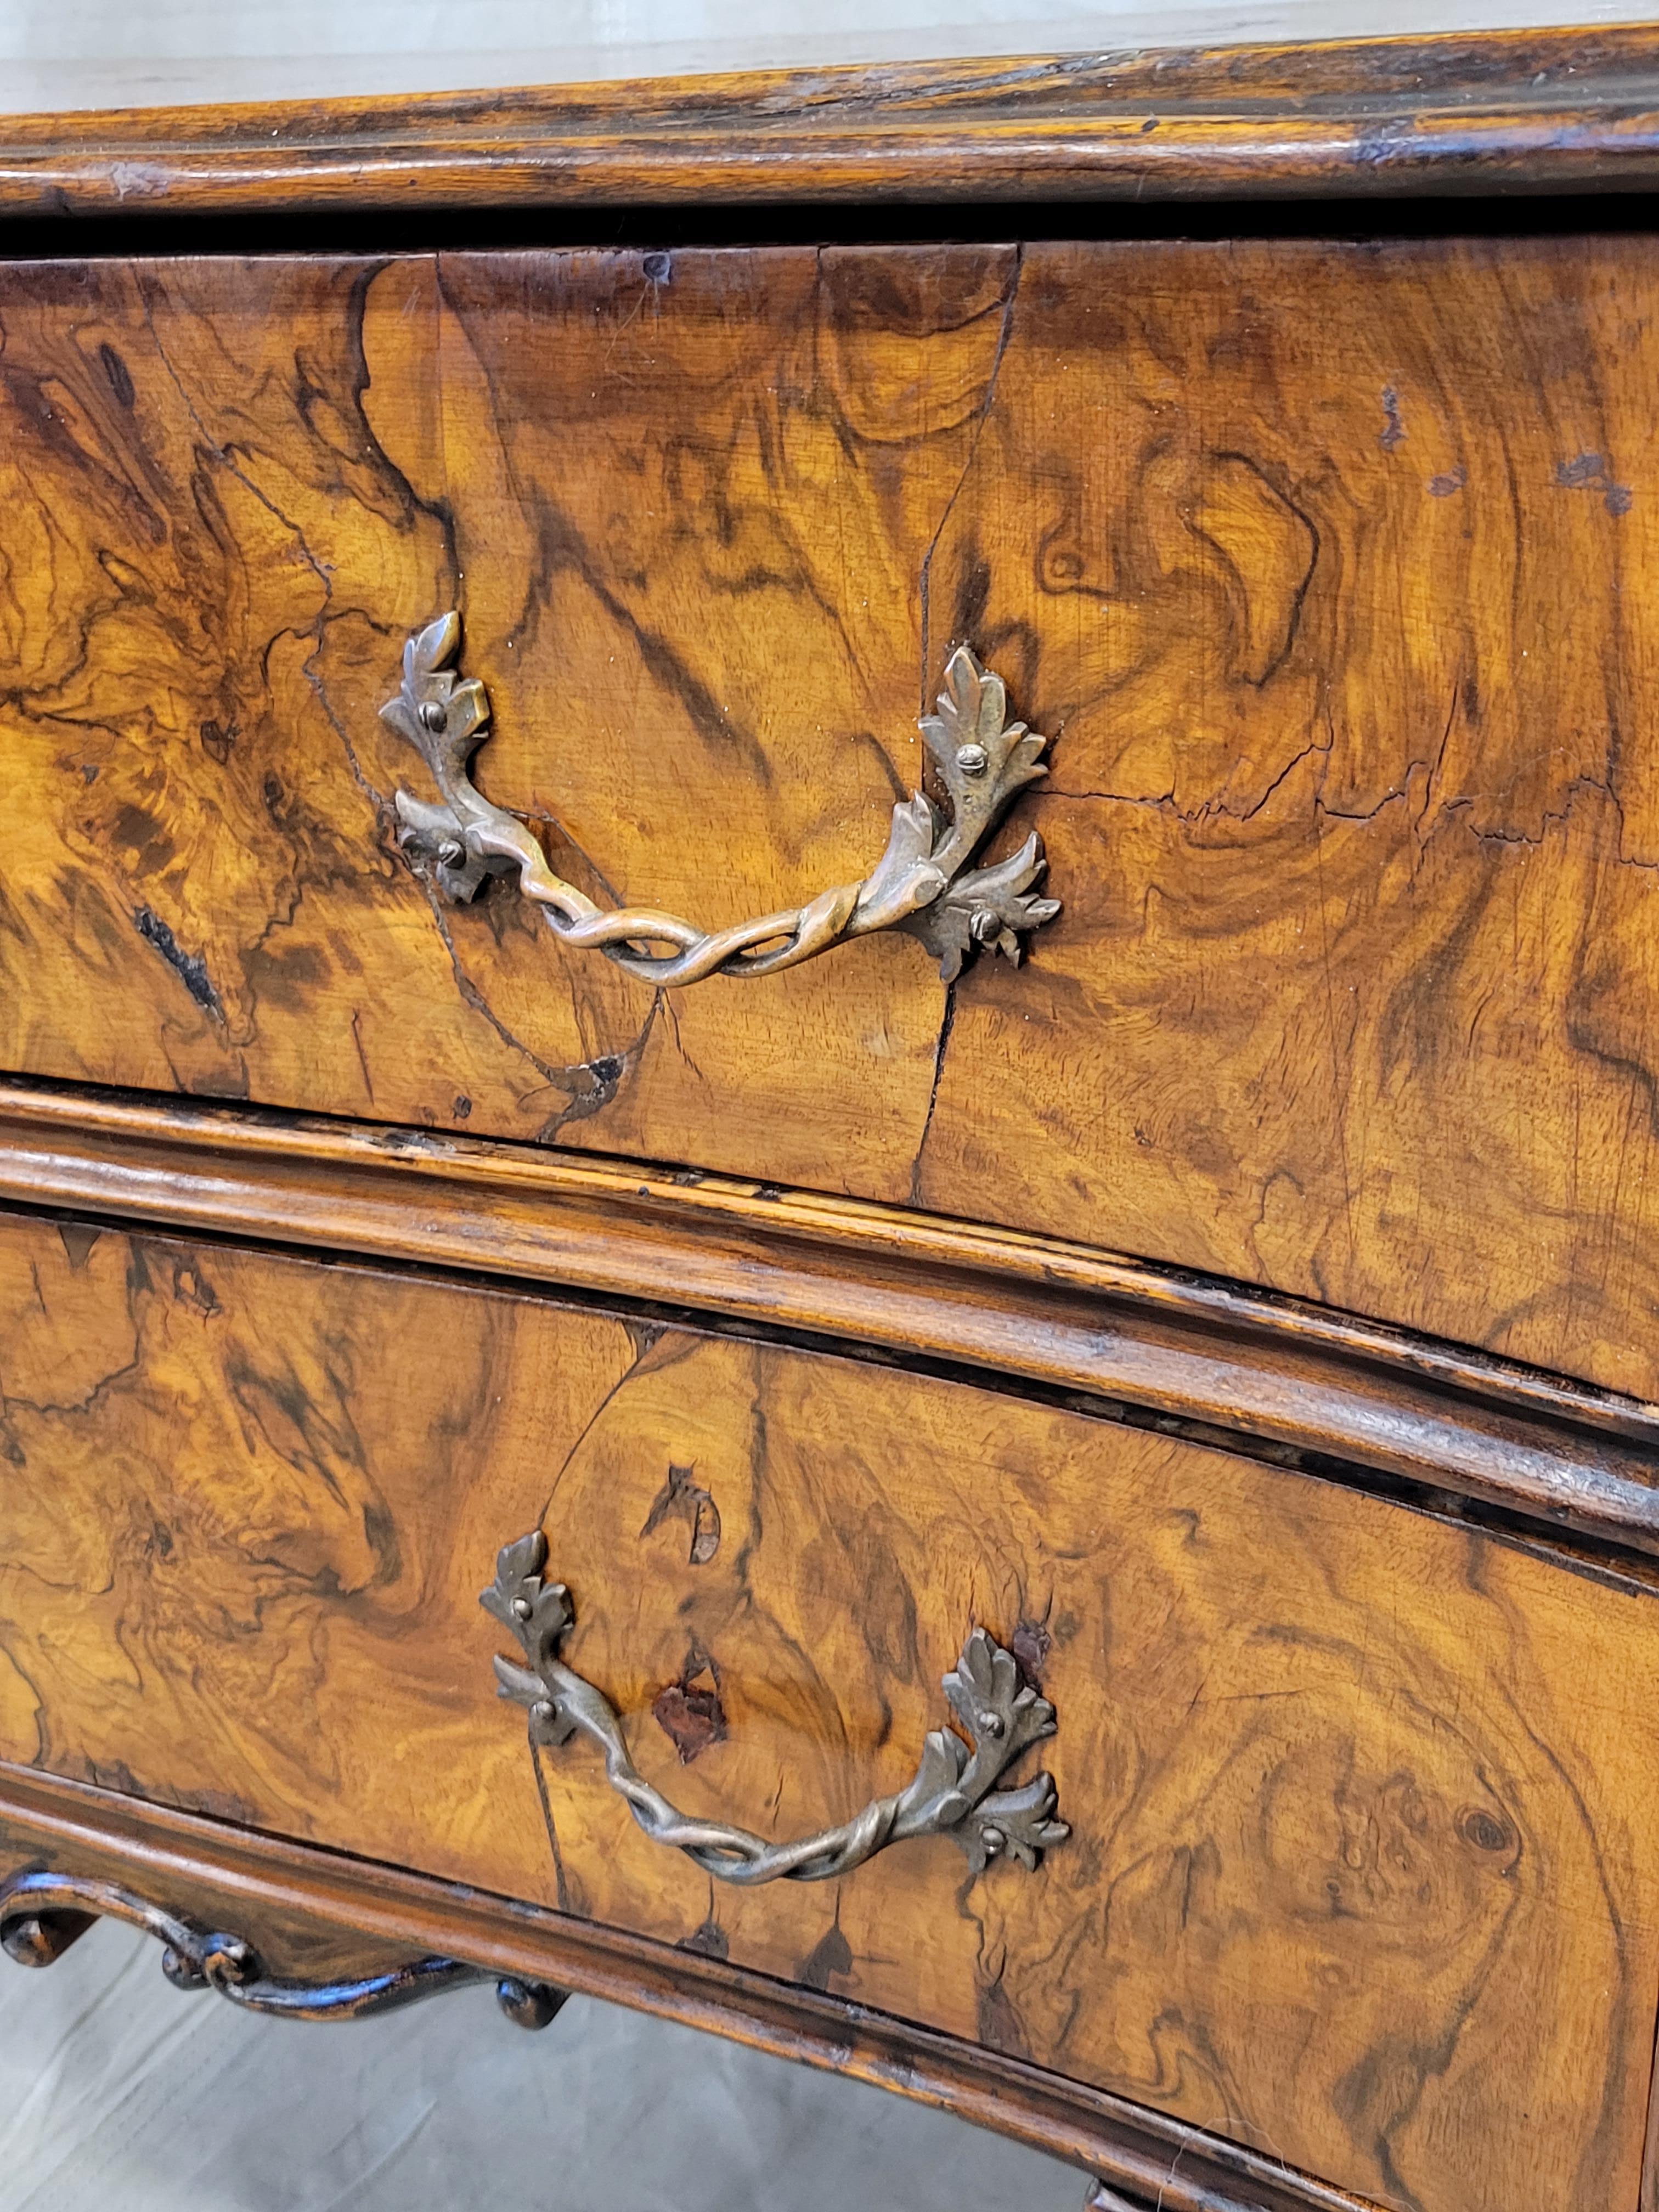 Bronze Antique Early 1800s French Burl Walnut Commode Sold by B. Altman & Co. New York